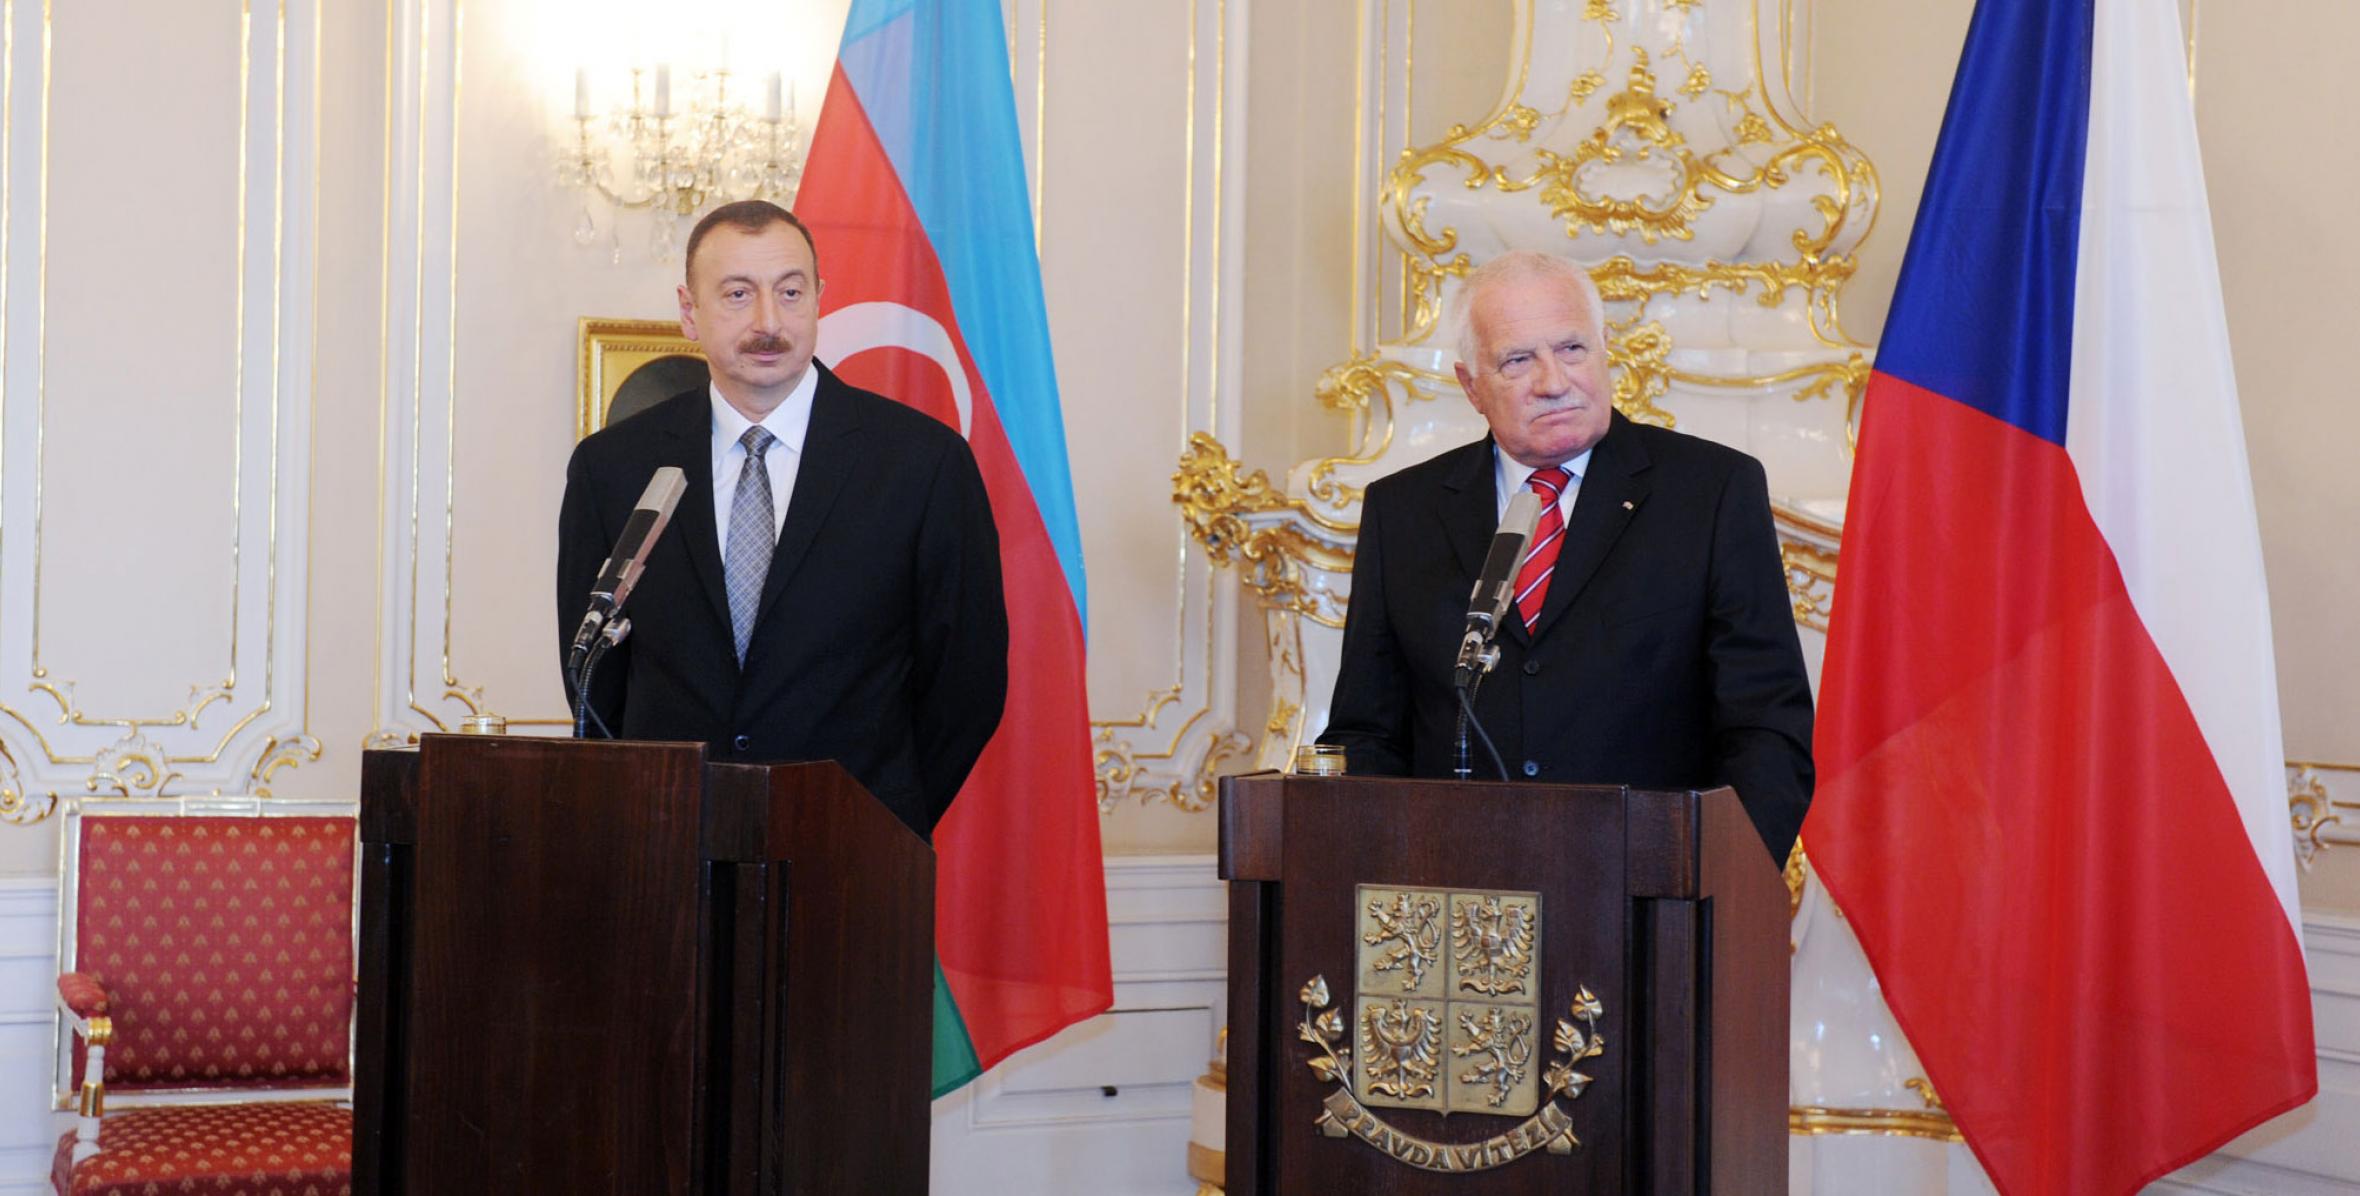 Joint press conference of the Presidents of Azerbaijan and the Czech Republic was held